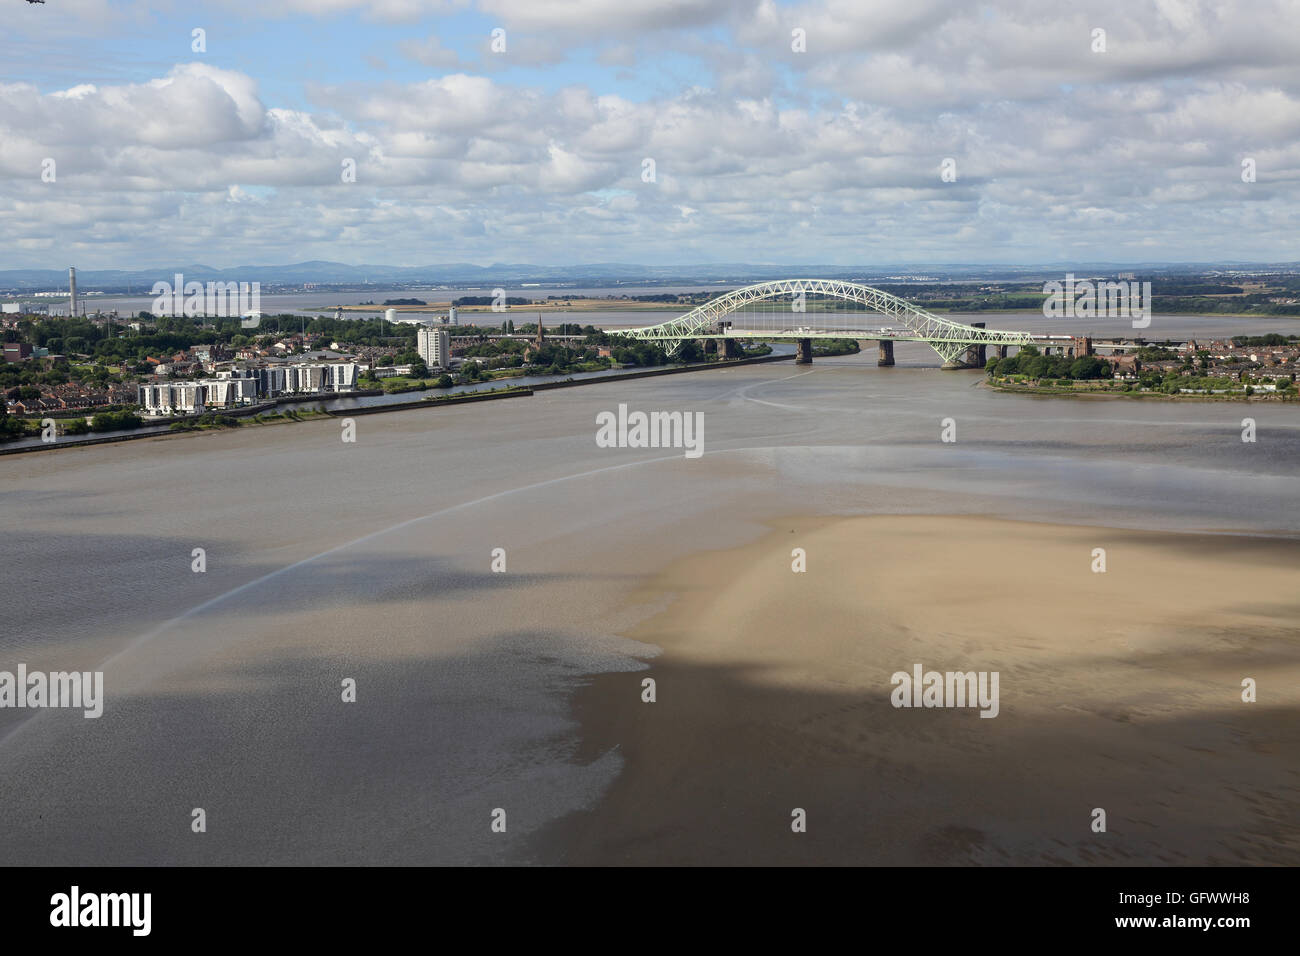 High-level view of the River Mersey at Runcorn showing the Silver Jubilee bridge, estuary mudflats and Welsh Mountains beyond Stock Photo